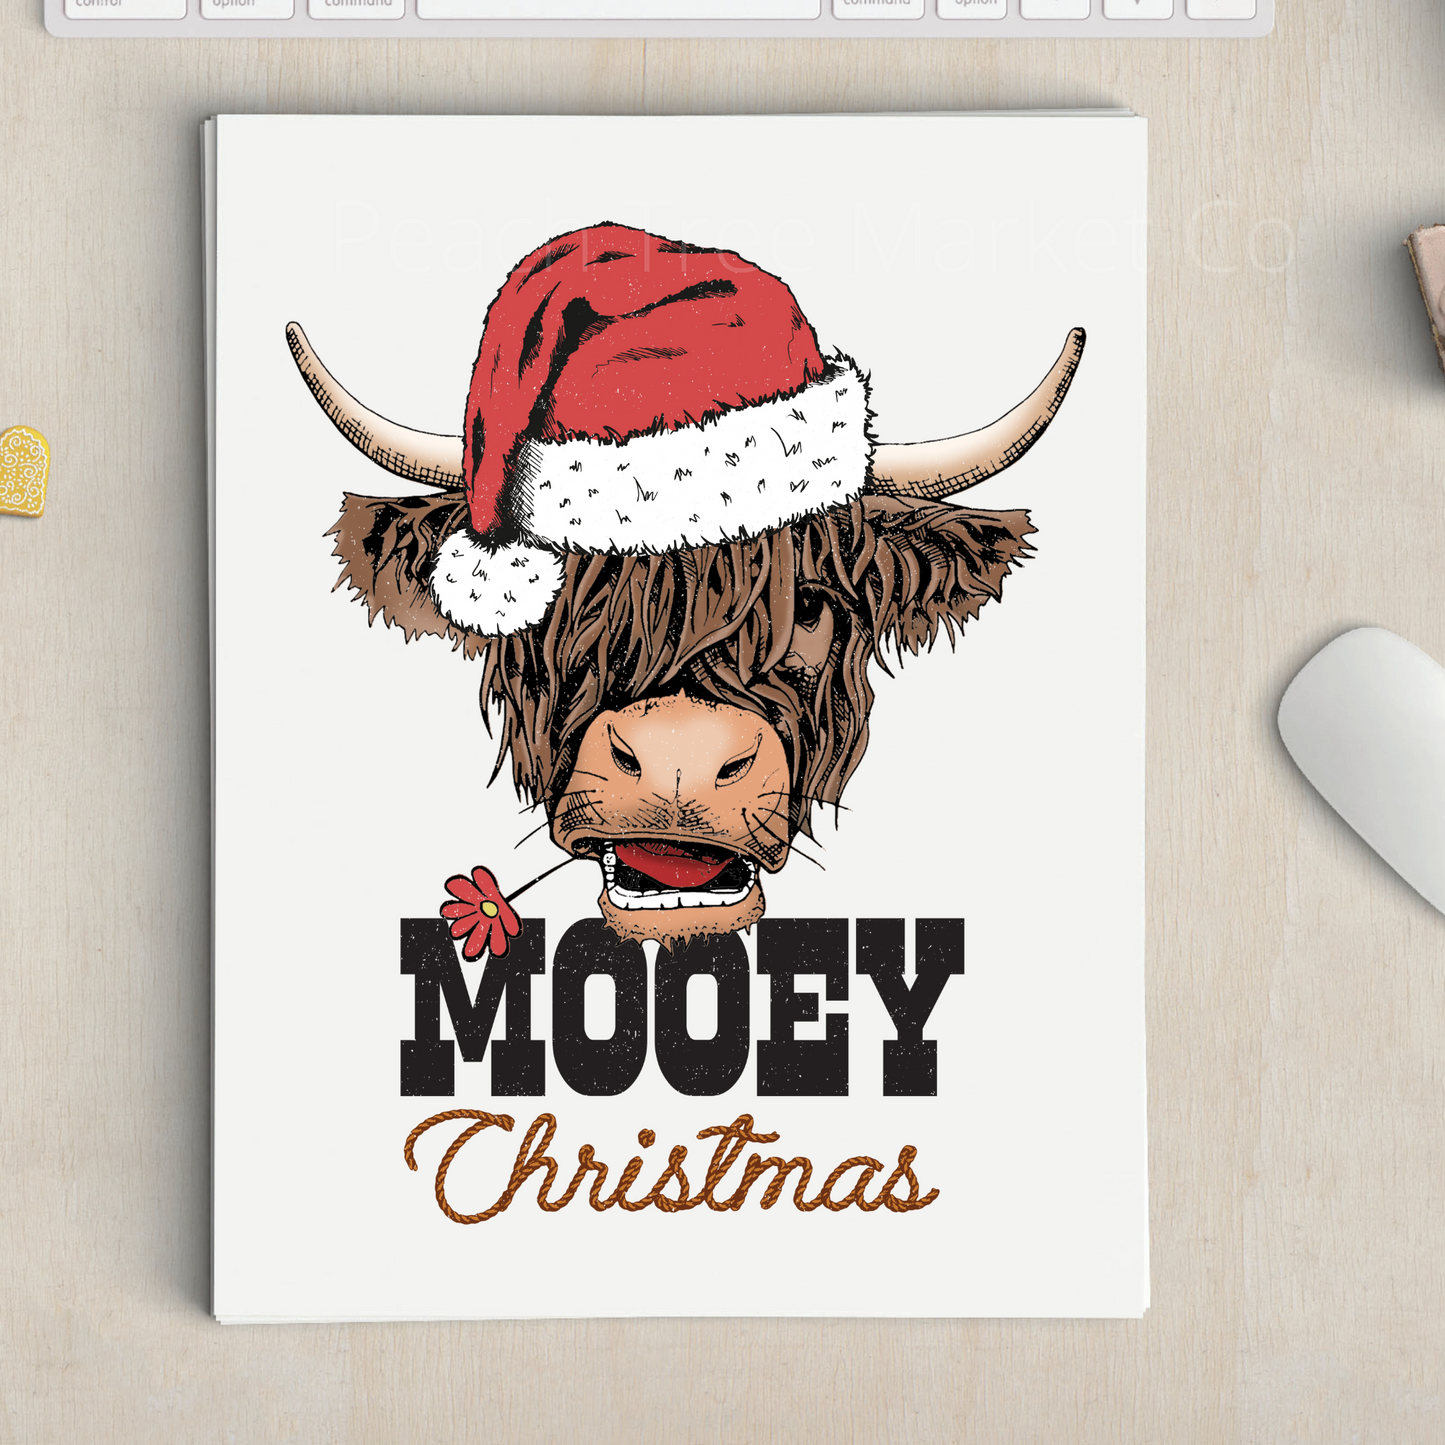 Mooey Christmas Sublimation Transfer